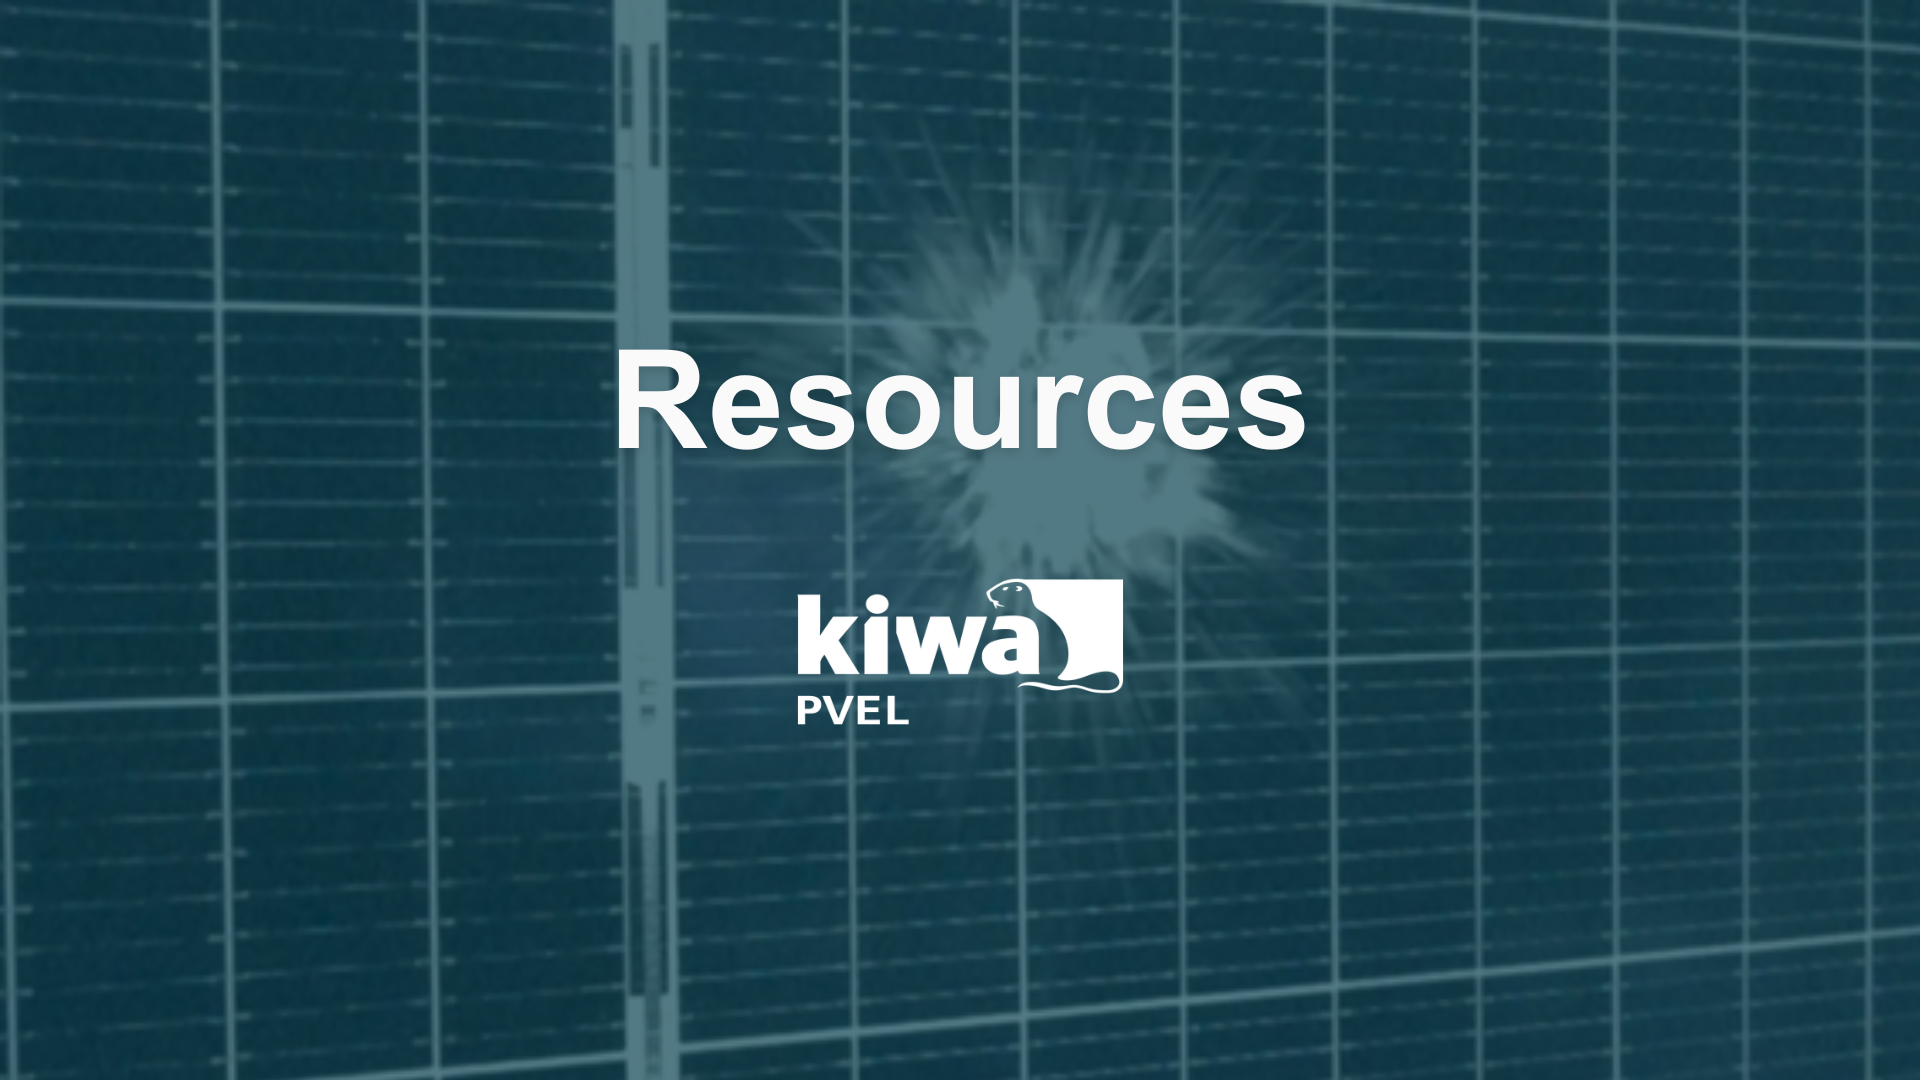 Solar panel with the word 'Resources'  and the logo Kiwa PVEL in front of it